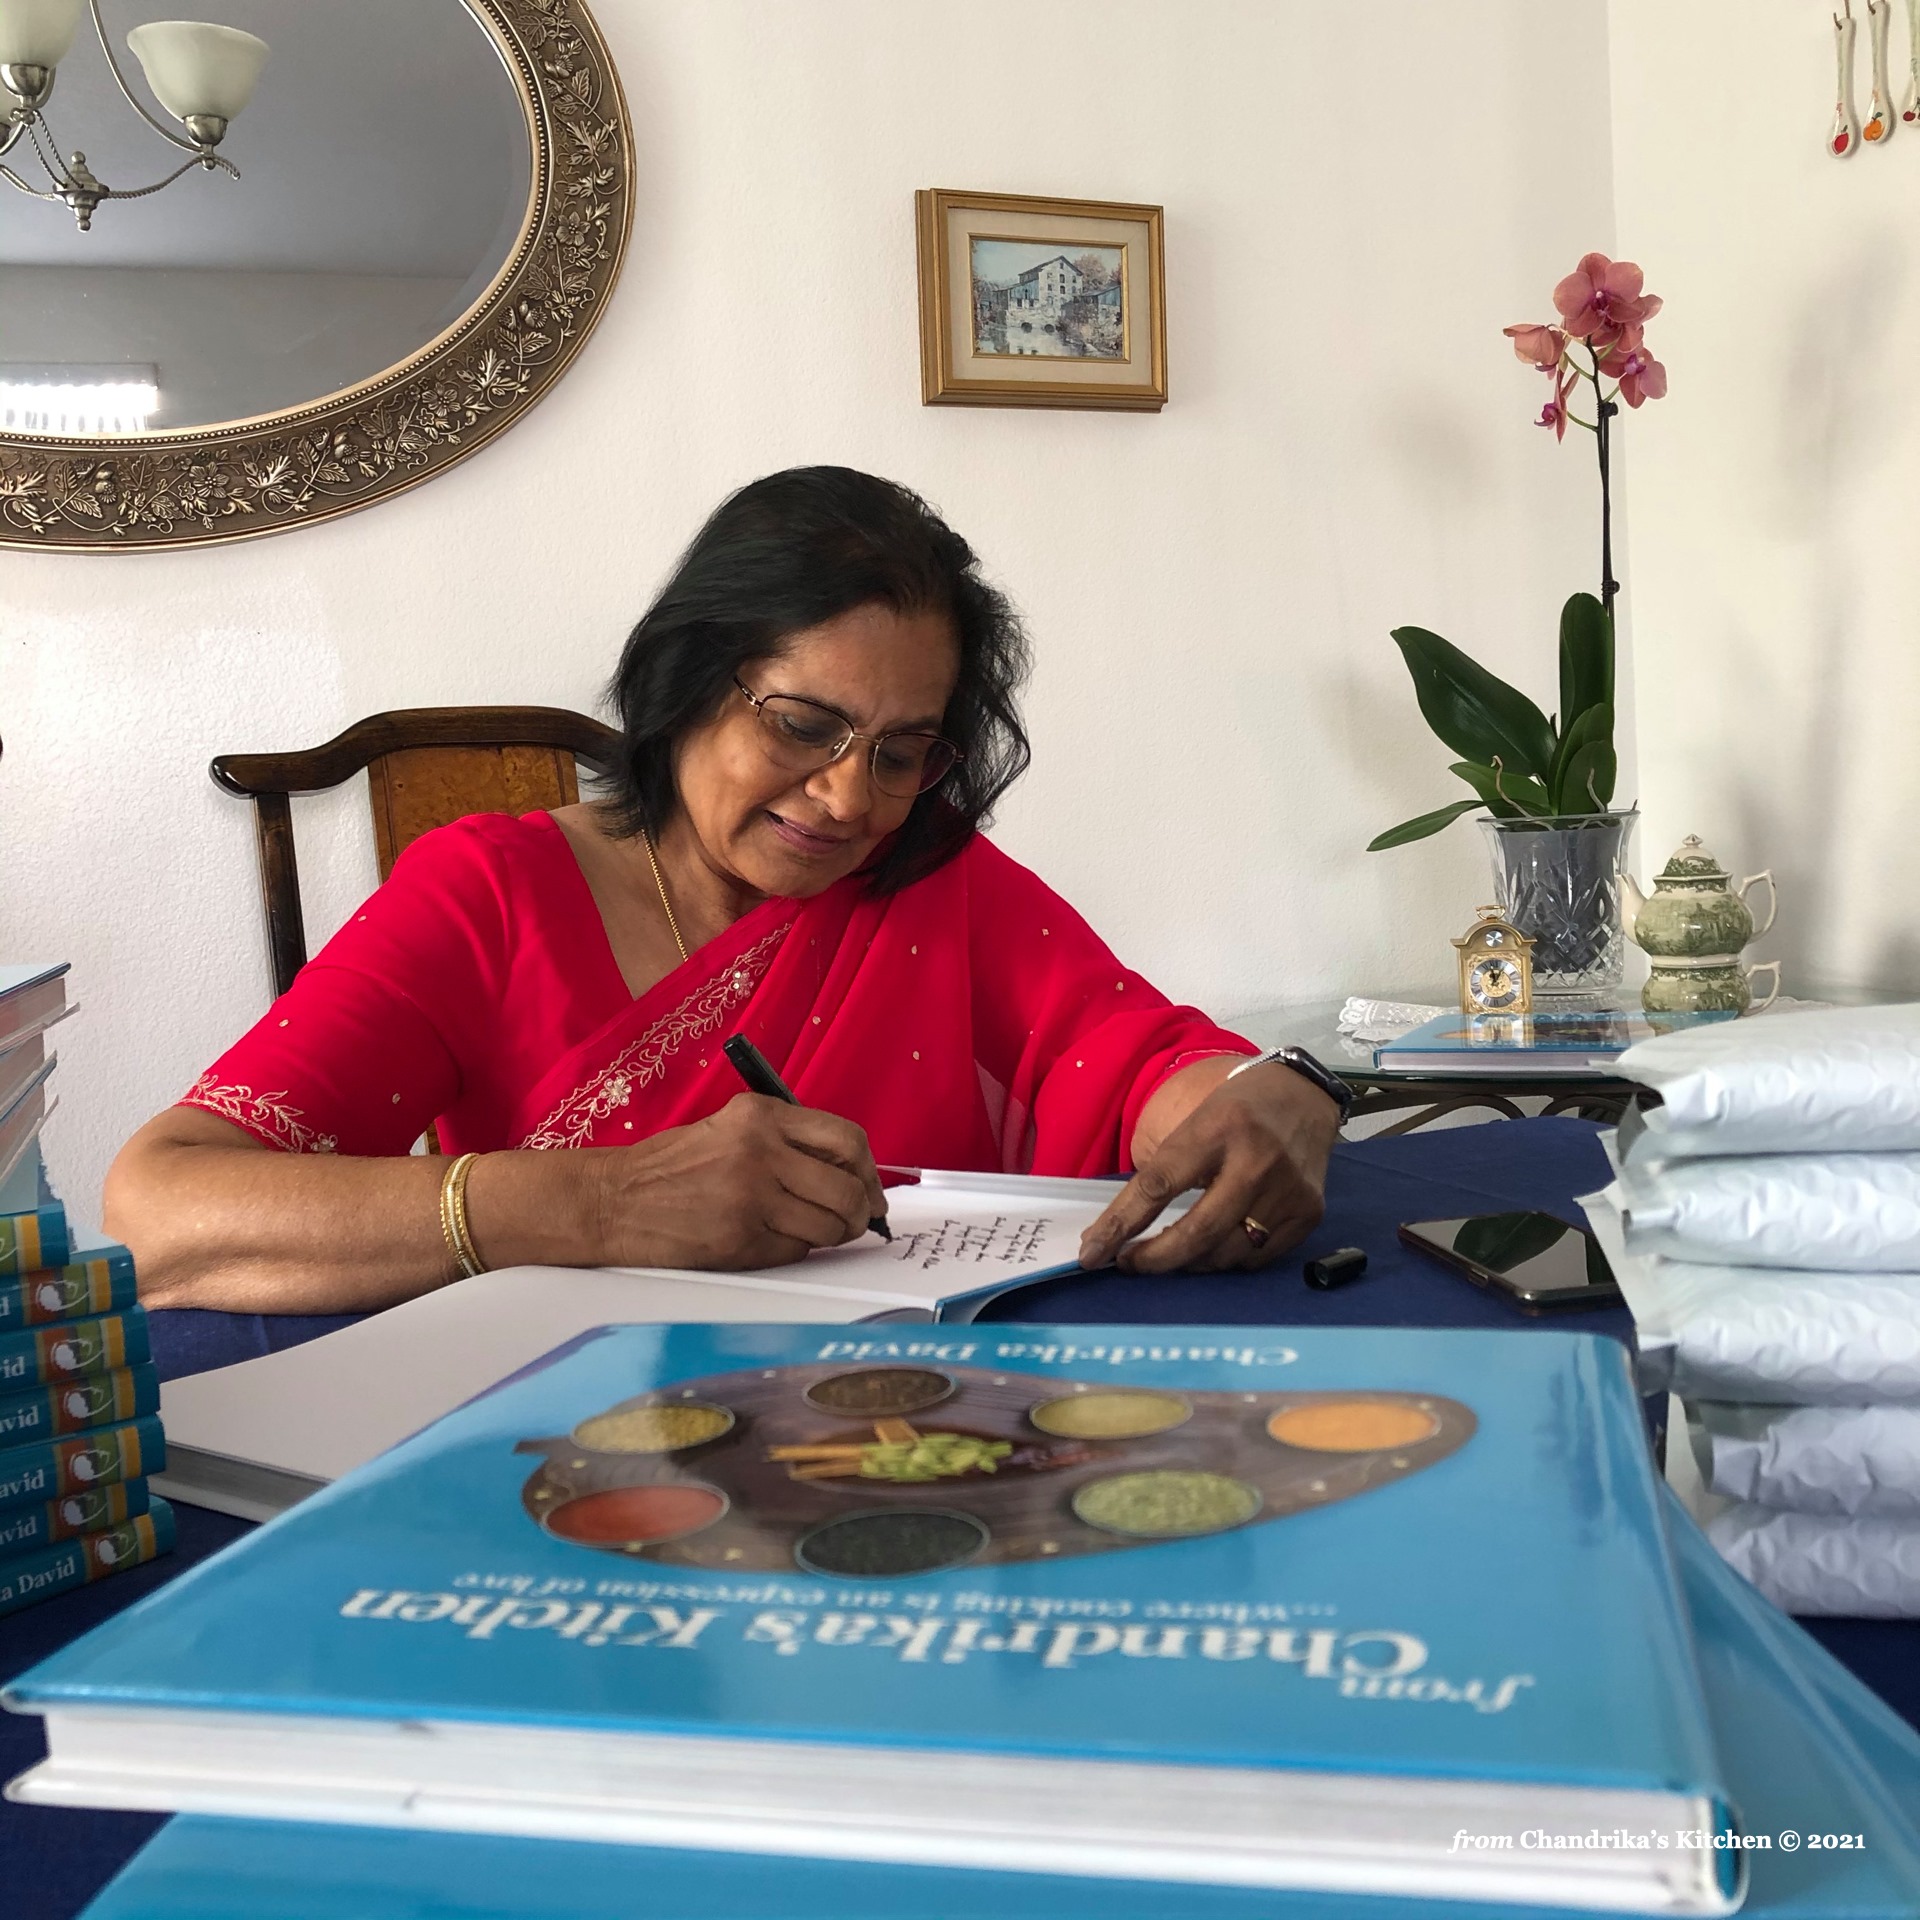 Frontlist | Local author publishes ‘from Chandrika’s Kitchen’